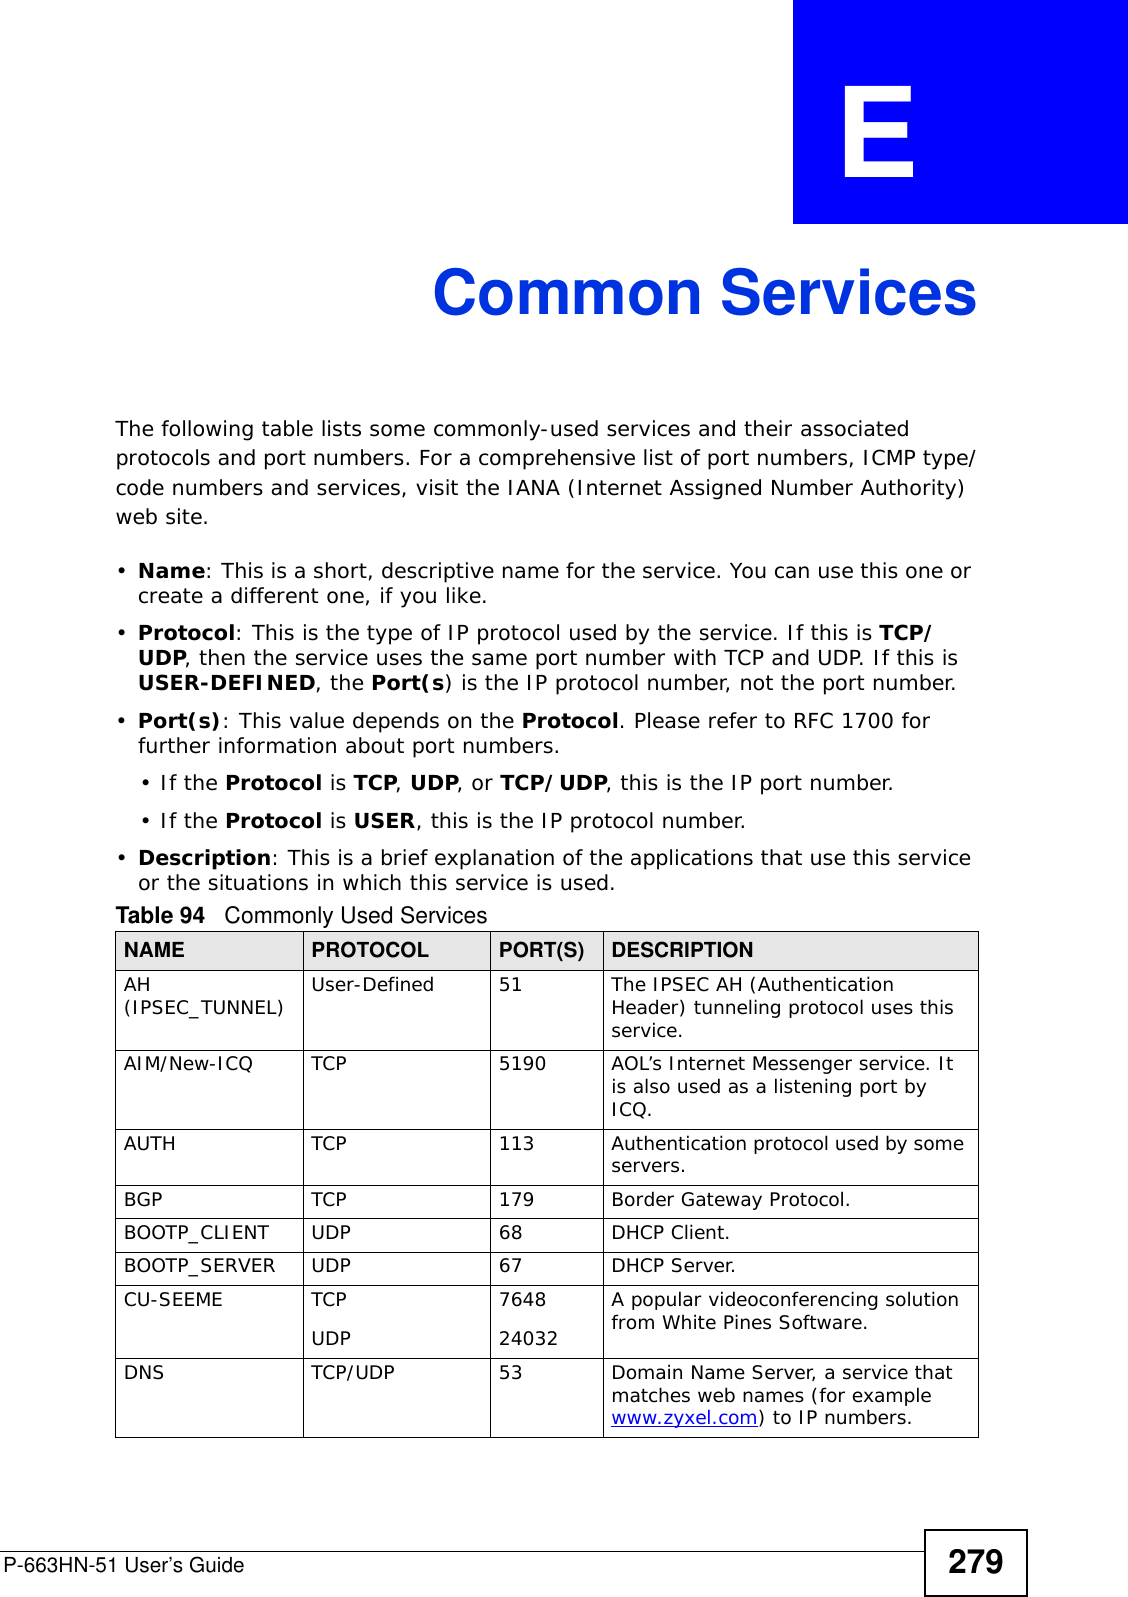 P-663HN-51 User’s Guide 279APPENDIX  E Common ServicesThe following table lists some commonly-used services and their associated protocols and port numbers. For a comprehensive list of port numbers, ICMP type/code numbers and services, visit the IANA (Internet Assigned Number Authority) web site. •Name: This is a short, descriptive name for the service. You can use this one or create a different one, if you like.•Protocol: This is the type of IP protocol used by the service. If this is TCP/UDP, then the service uses the same port number with TCP and UDP. If this is USER-DEFINED, the Port(s) is the IP protocol number, not the port number.•Port(s): This value depends on the Protocol. Please refer to RFC 1700 for further information about port numbers.•If the Protocol is TCP, UDP, or TCP/UDP, this is the IP port number.•If the Protocol is USER, this is the IP protocol number.•Description: This is a brief explanation of the applications that use this service or the situations in which this service is used.Table 94   Commonly Used ServicesNAME PROTOCOL PORT(S) DESCRIPTIONAH (IPSEC_TUNNEL) User-Defined 51 The IPSEC AH (Authentication Header) tunneling protocol uses this service.AIM/New-ICQ TCP 5190 AOL’s Internet Messenger service. It is also used as a listening port by ICQ.AUTH TCP 113 Authentication protocol used by some servers.BGP TCP 179 Border Gateway Protocol.BOOTP_CLIENT UDP 68 DHCP Client.BOOTP_SERVER UDP 67 DHCP Server.CU-SEEME TCPUDP764824032A popular videoconferencing solution from White Pines Software.DNS TCP/UDP 53 Domain Name Server, a service that matches web names (for example www.zyxel.com) to IP numbers.